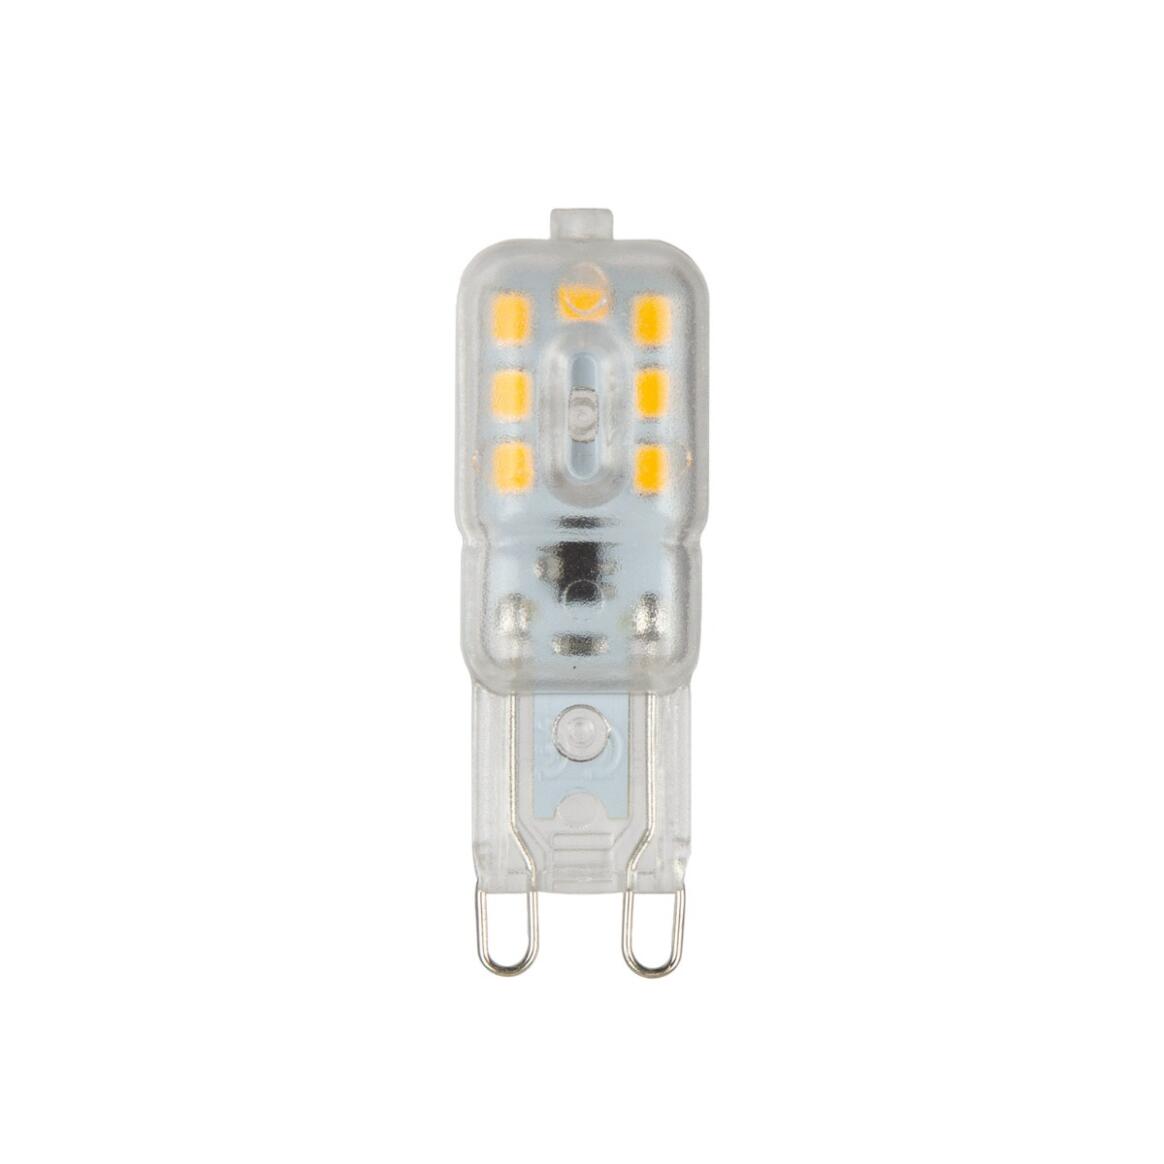 G9 LED Bi-Pin Bulb Dimmable 3W 2700k 250lm 4.5cm main product image